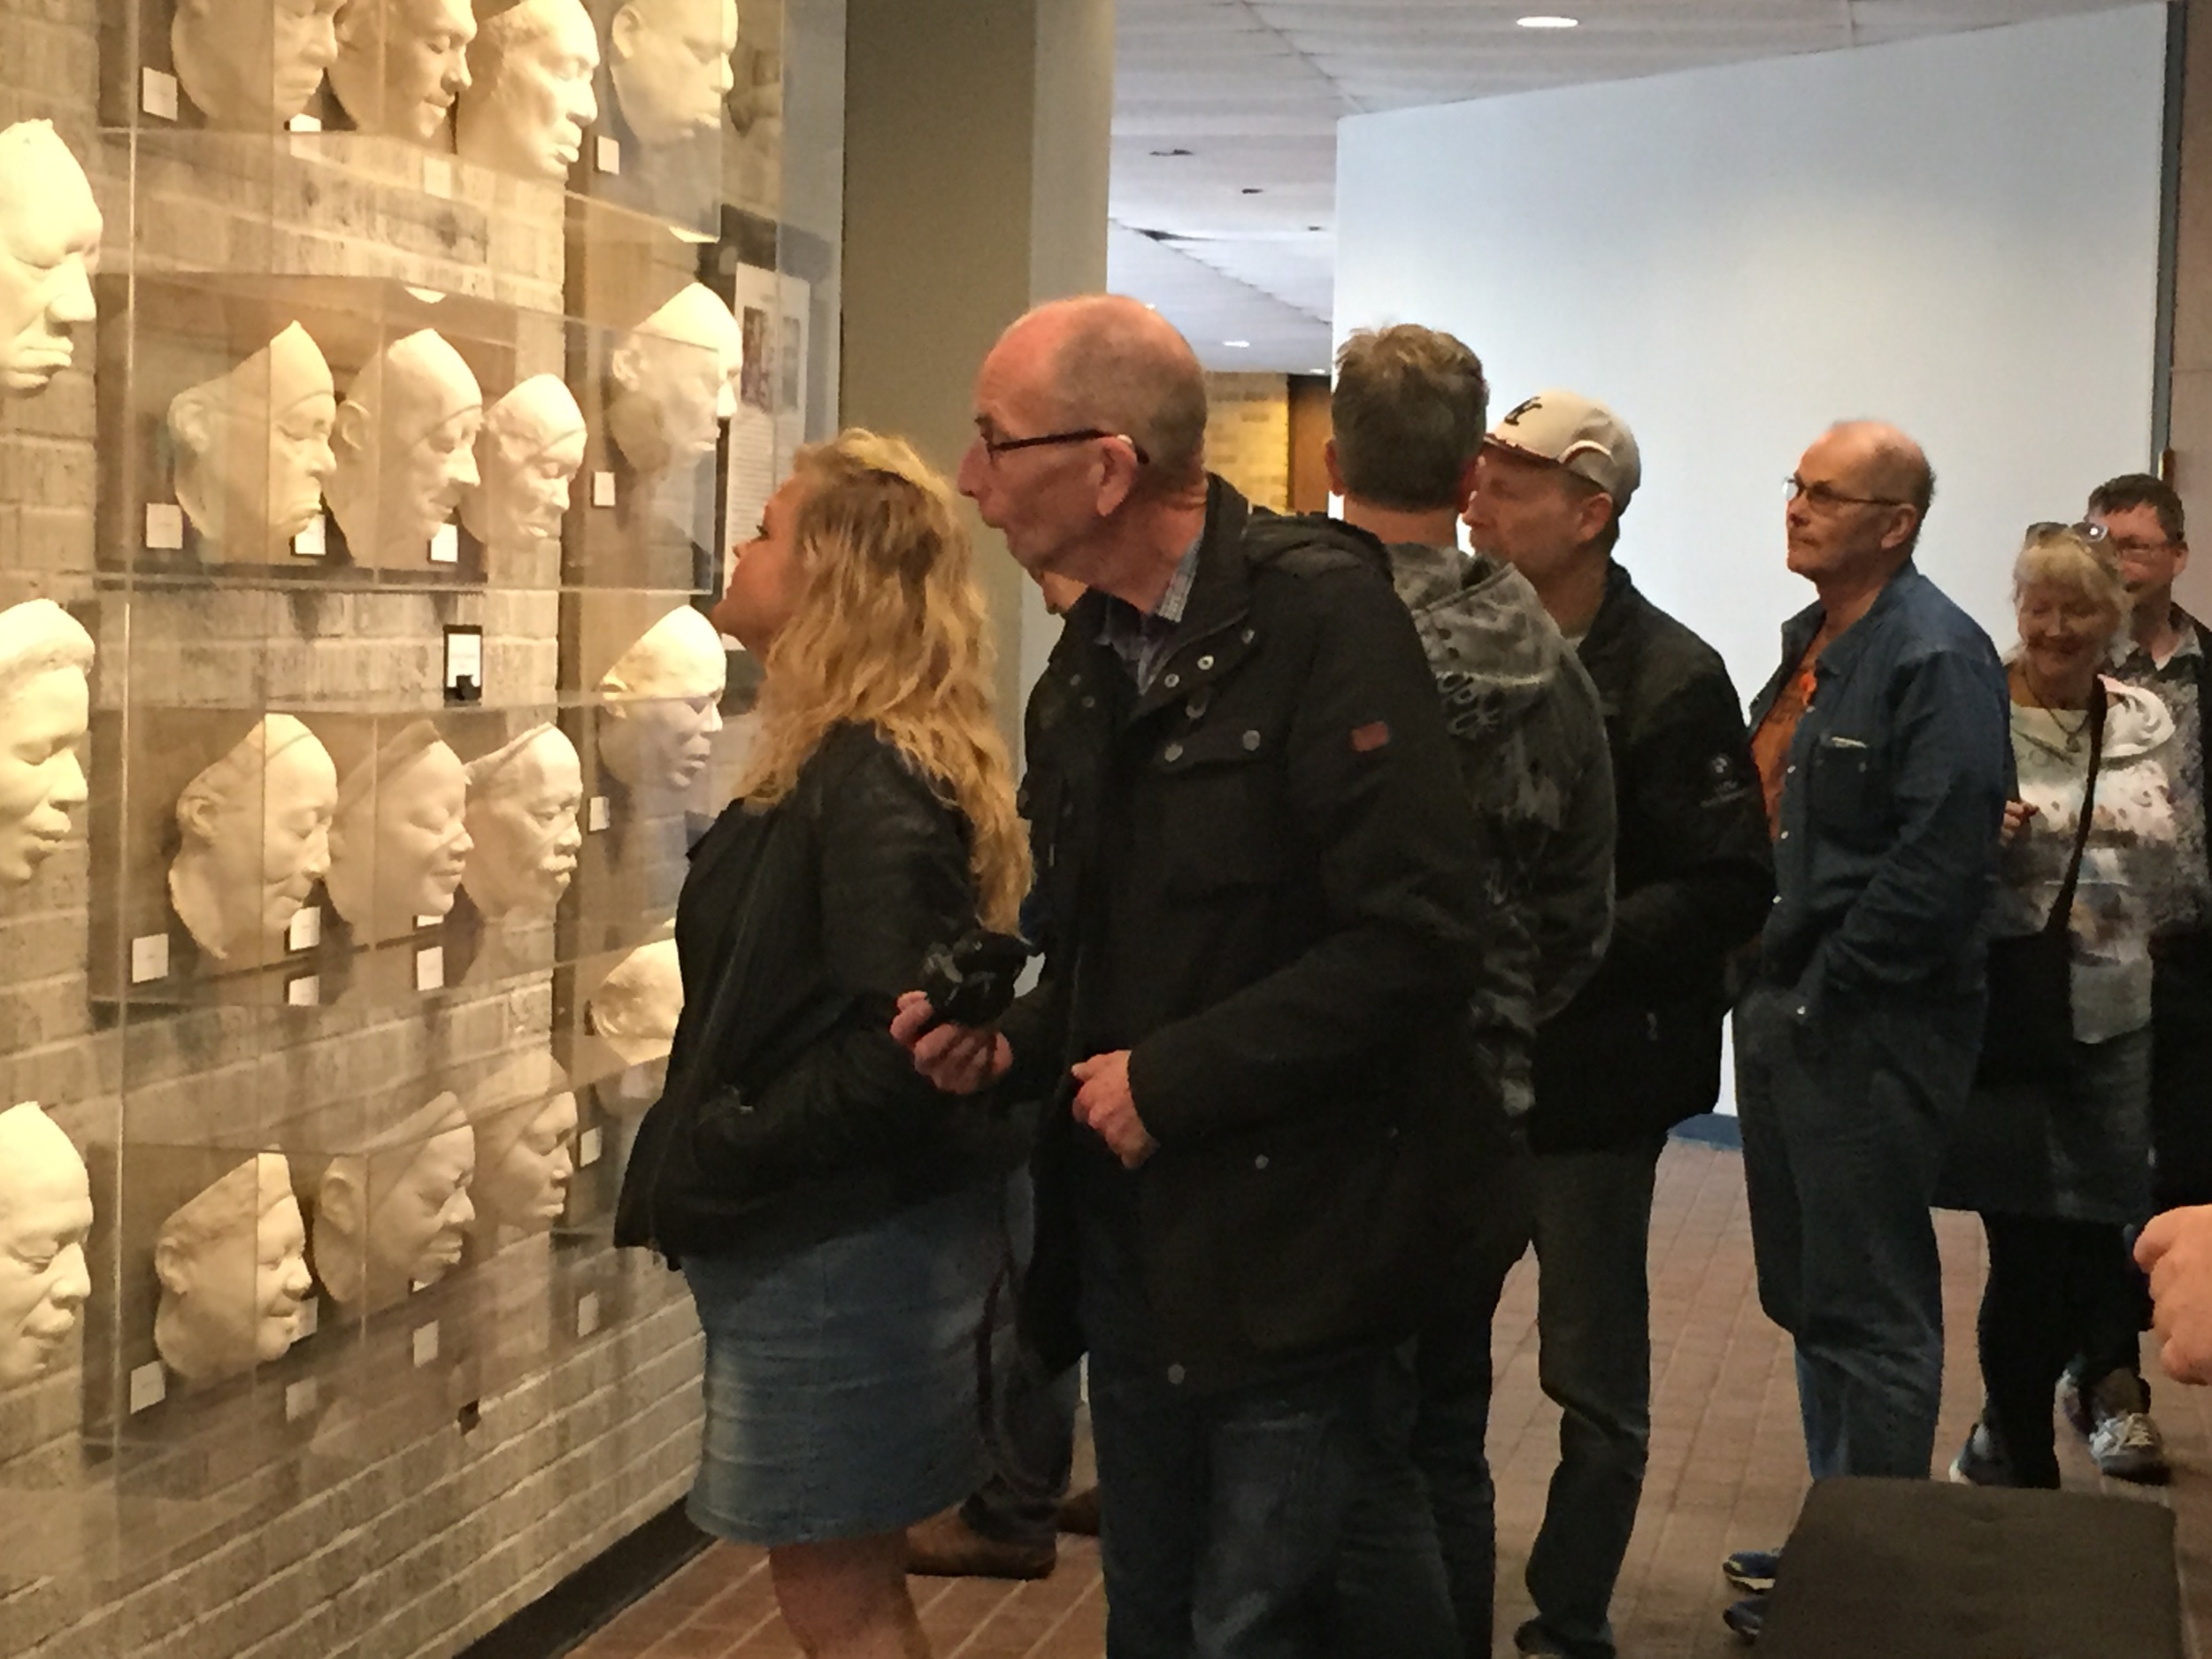  The Swedish tour group's trip began with a visit to the Delta Center for Culture and Learning where they viewed Sharon McConnell's lifecasts of Blues artists in the Center's gallery space. 